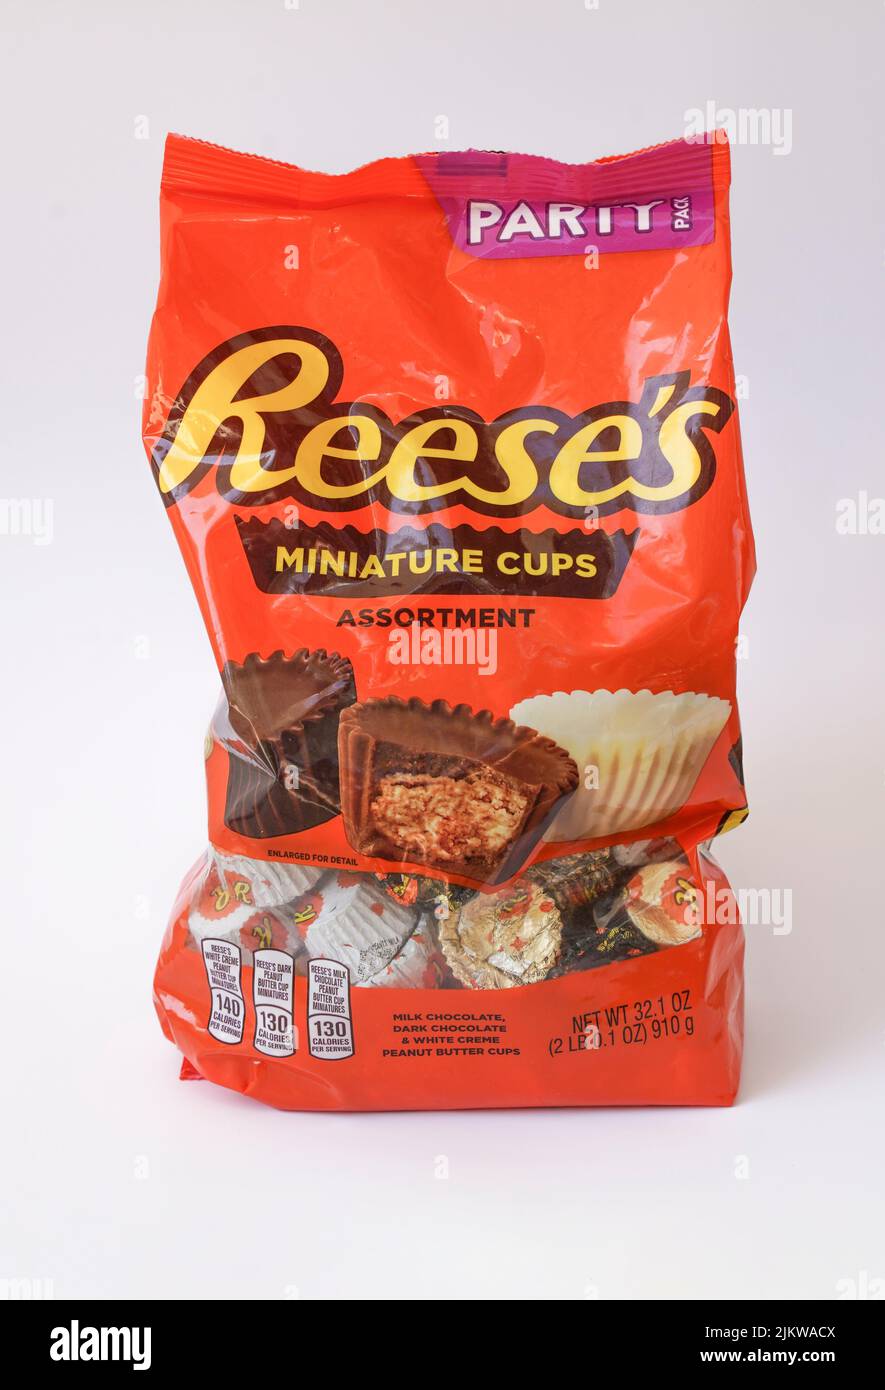 Bag of Reese's miniature cups, party pack, Reeses peanut butter cups. Stock Photo